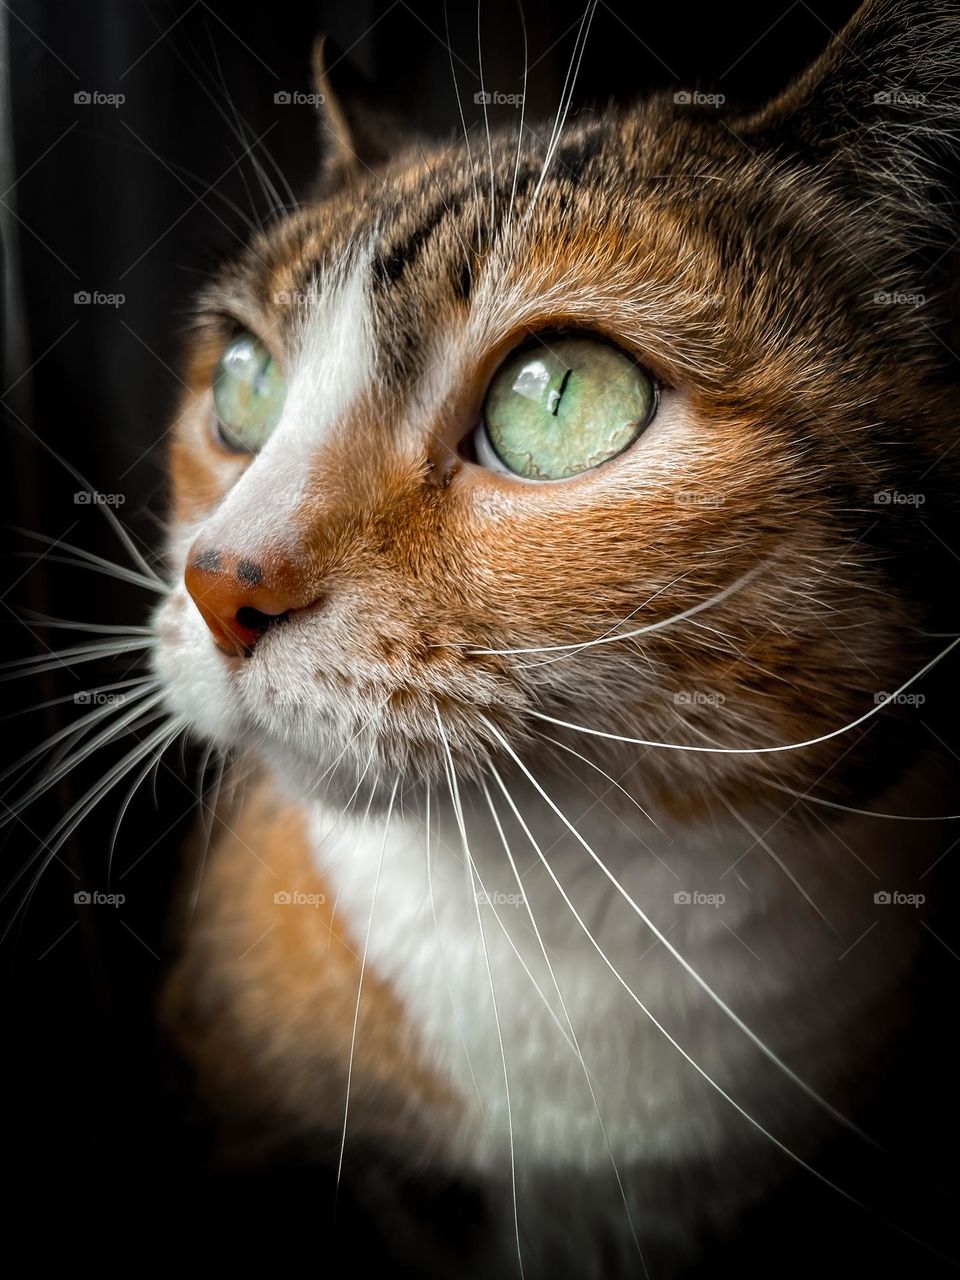 Patch tabby tabby calico senior cat beautiful cute adorable dark background big green eyes whiskers nose unique markings bestie pet photo picture image feline eyes photography phone portrait pets